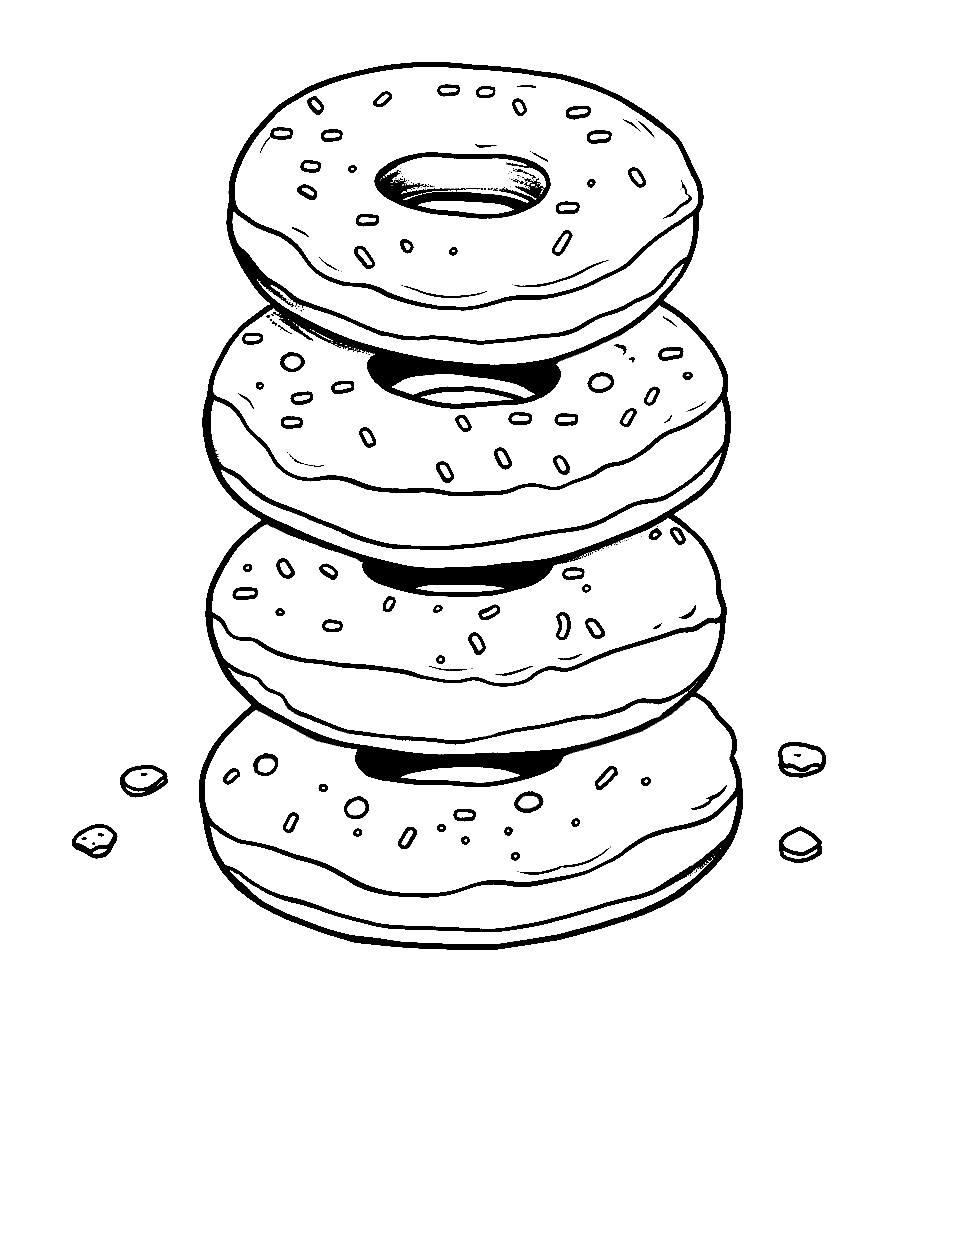 Donut Tower Challenge Coloring Page - A tall tower made of delicious donuts.